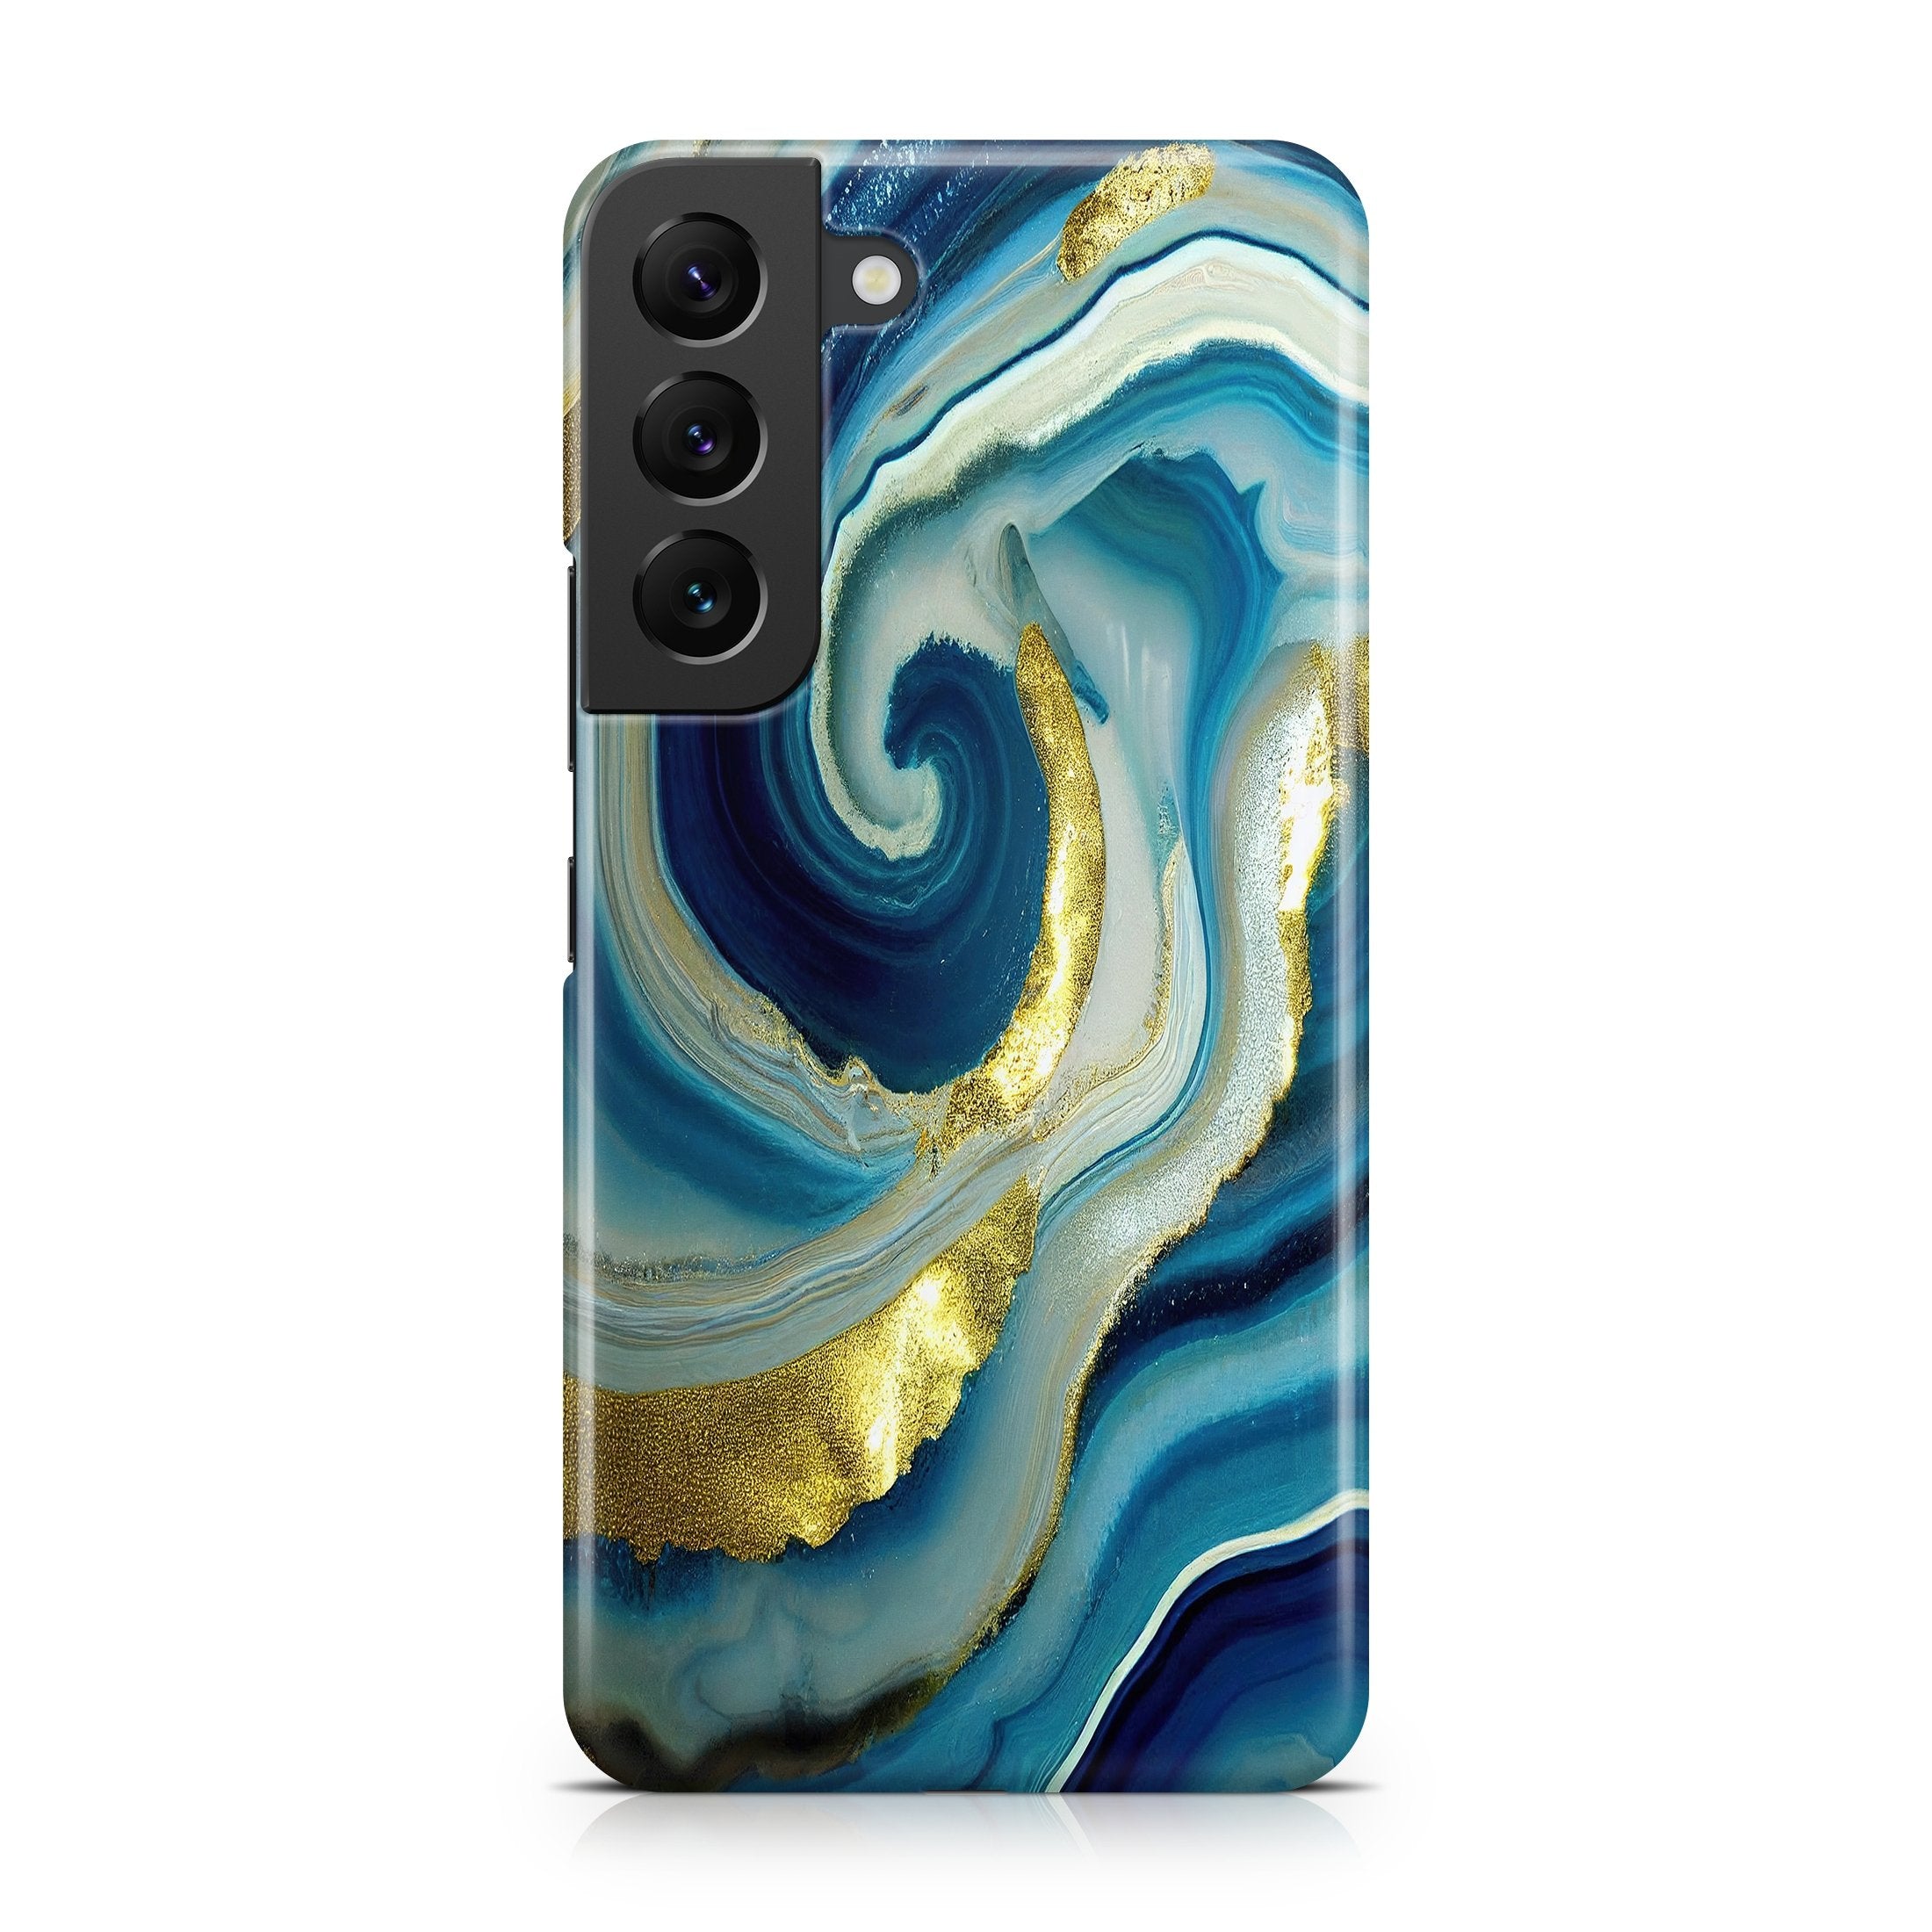 Catalyst Blue Marble - Samsung phone case designs by CaseSwagger